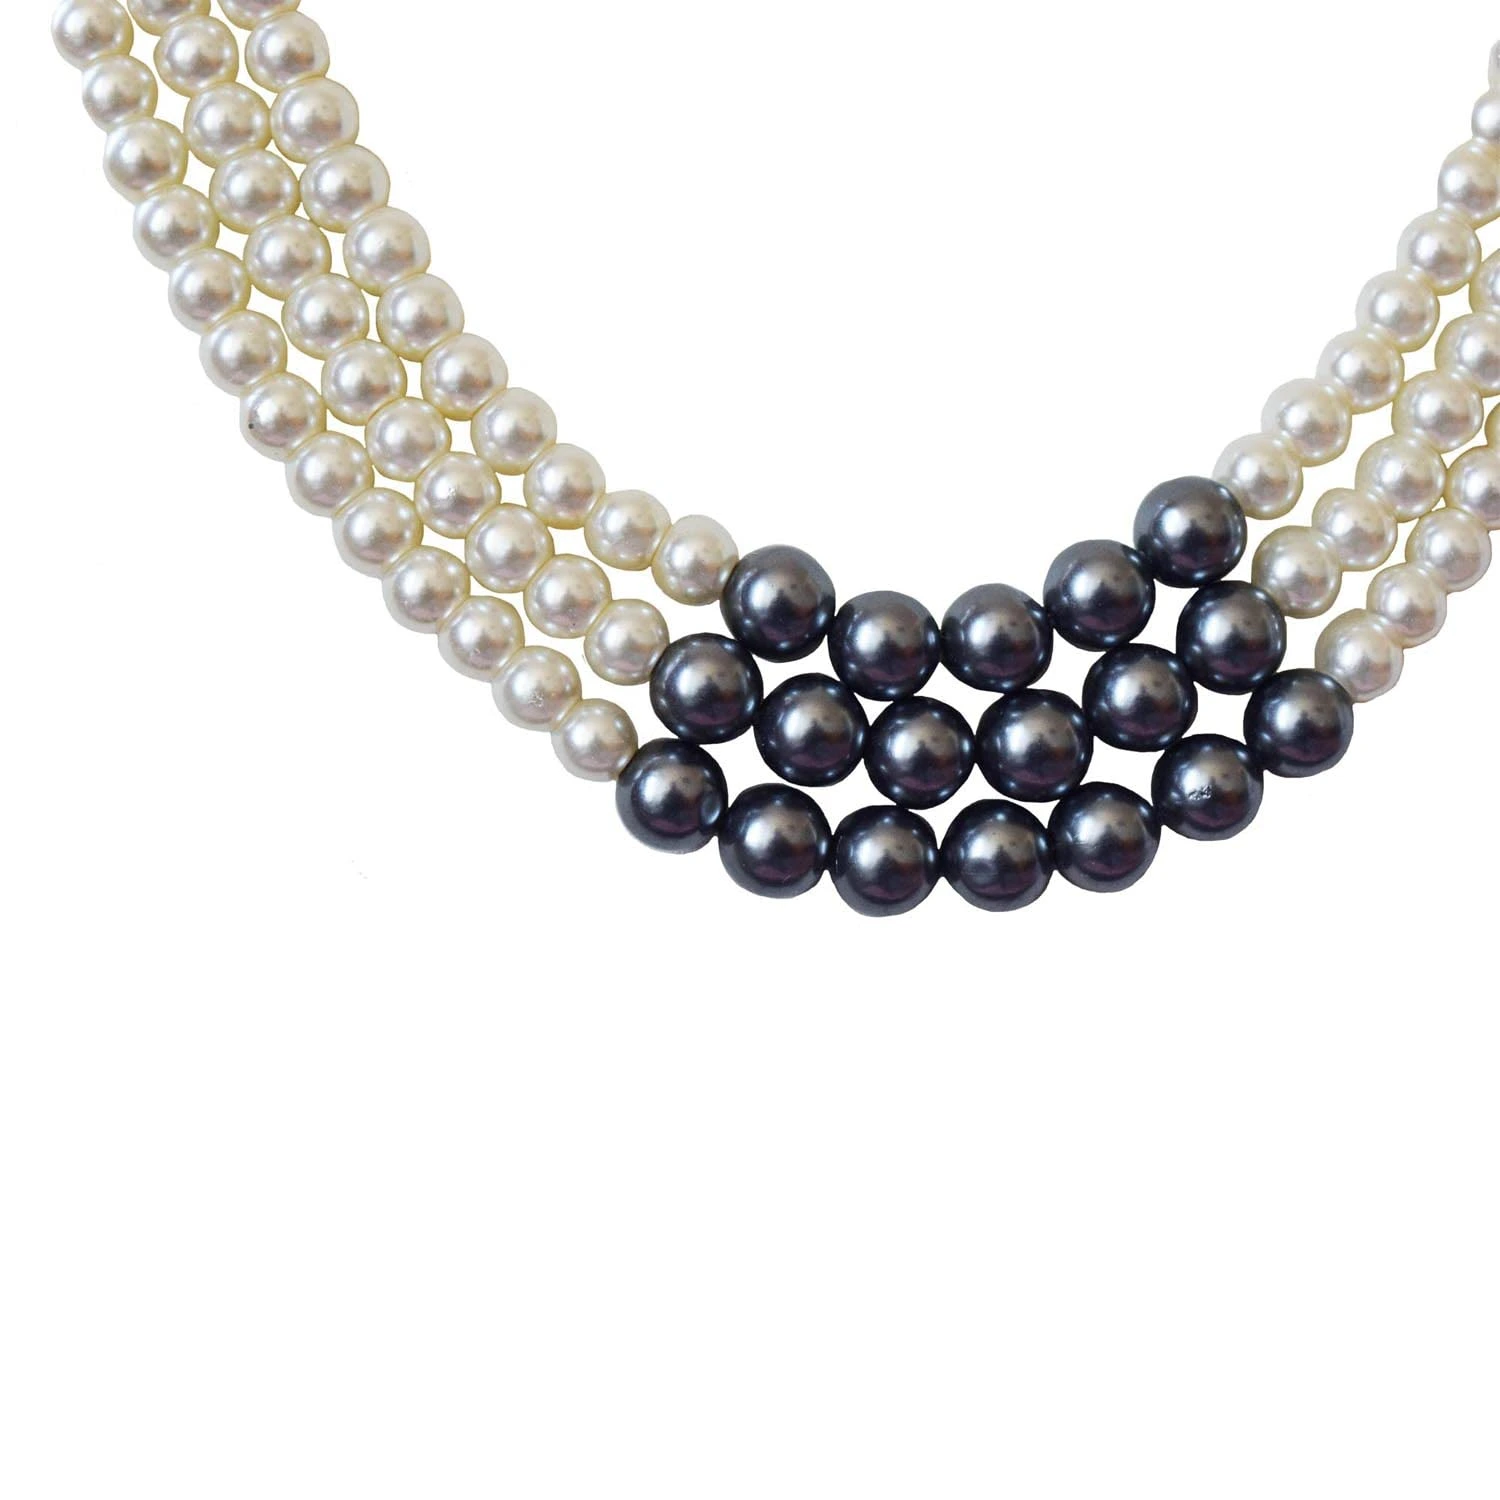 3 Line Heavy Looking White, Grey Shell Pearl Necklace for Women